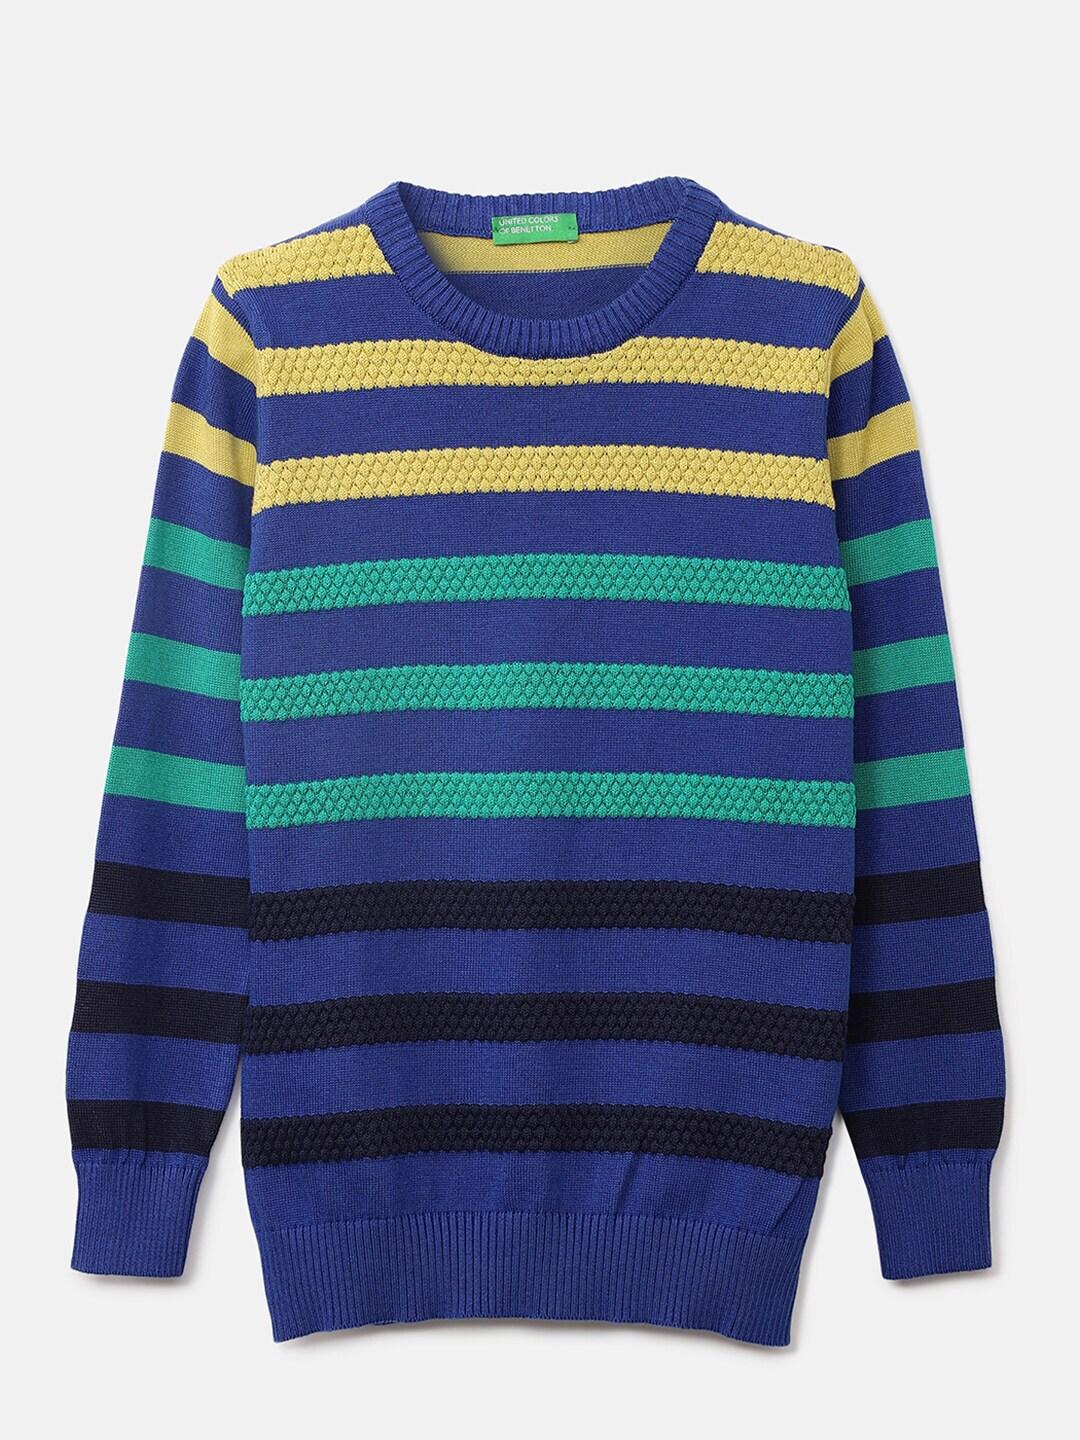 United Colors of Benetton Boys Blue & Yellow Cotton Striped Pullover